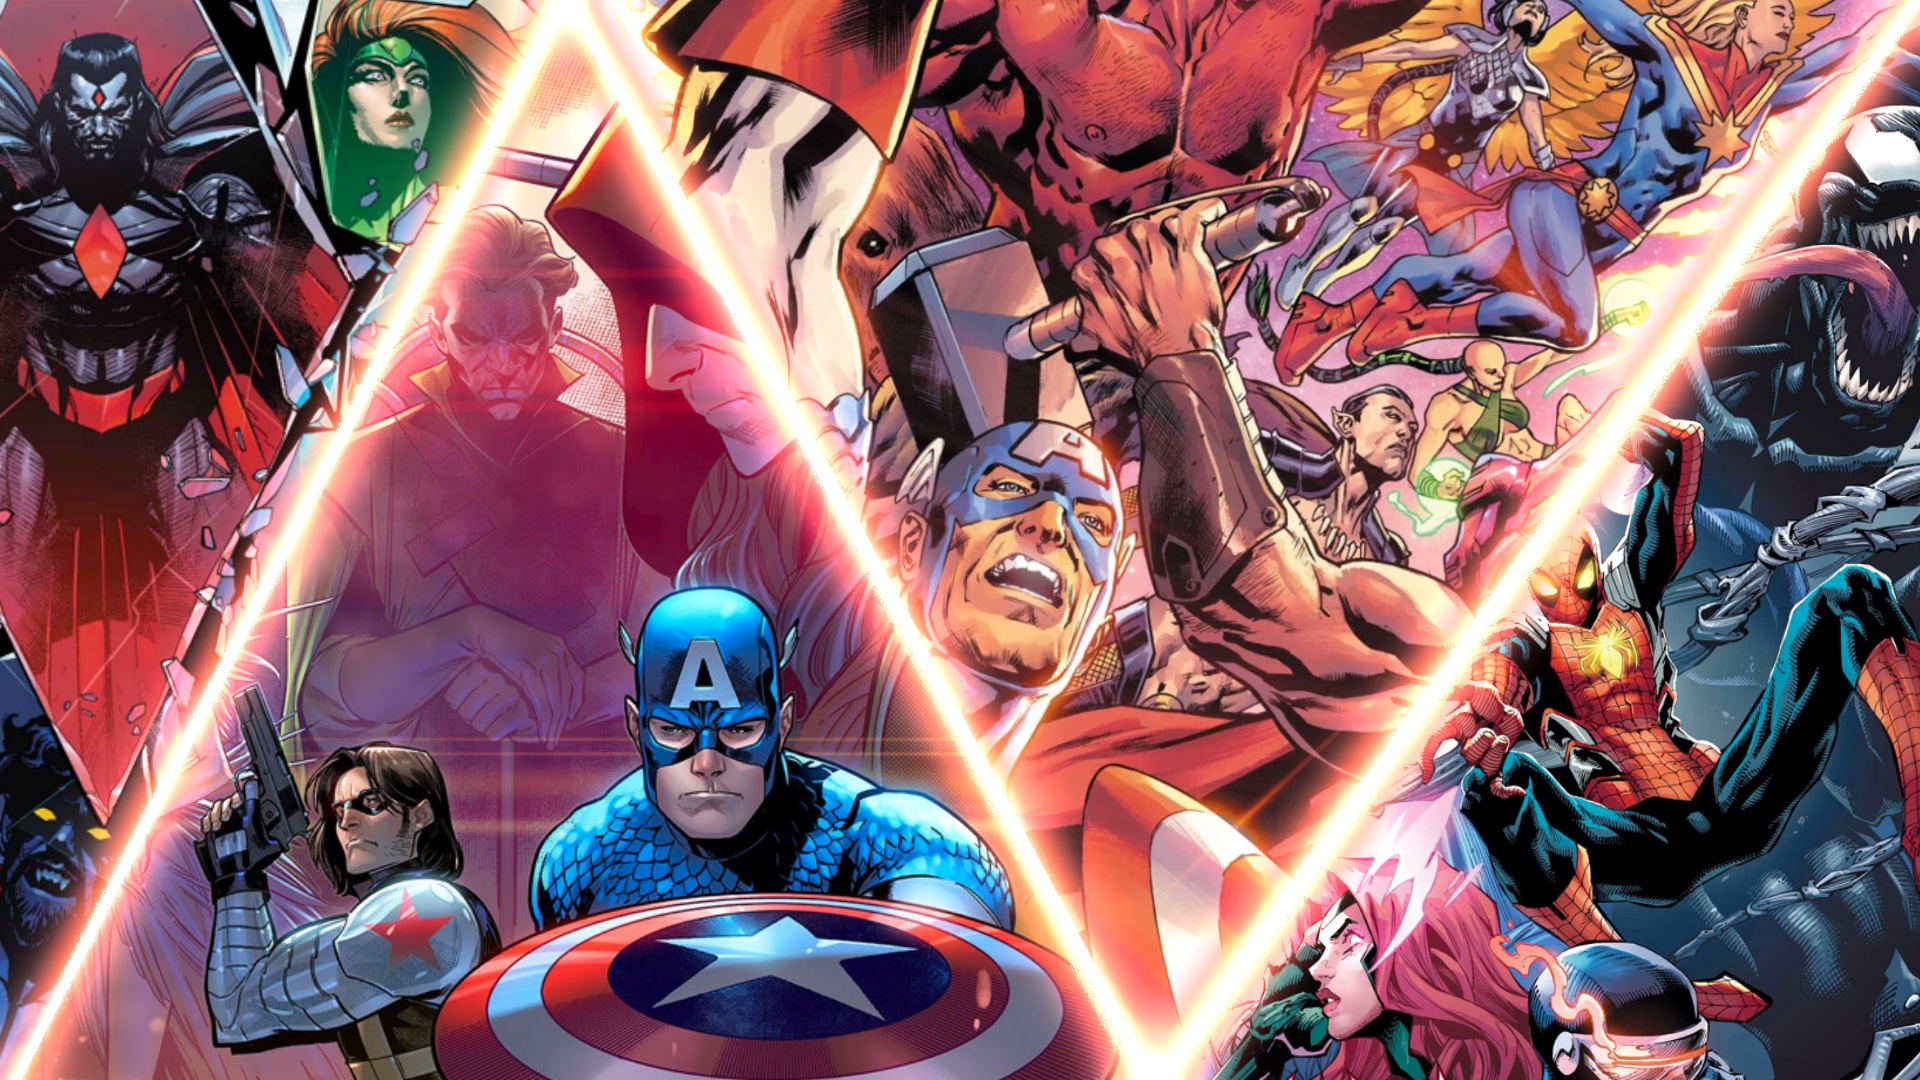 AVENGERS ASSEMBLE crossover continues in Marvel's December titles